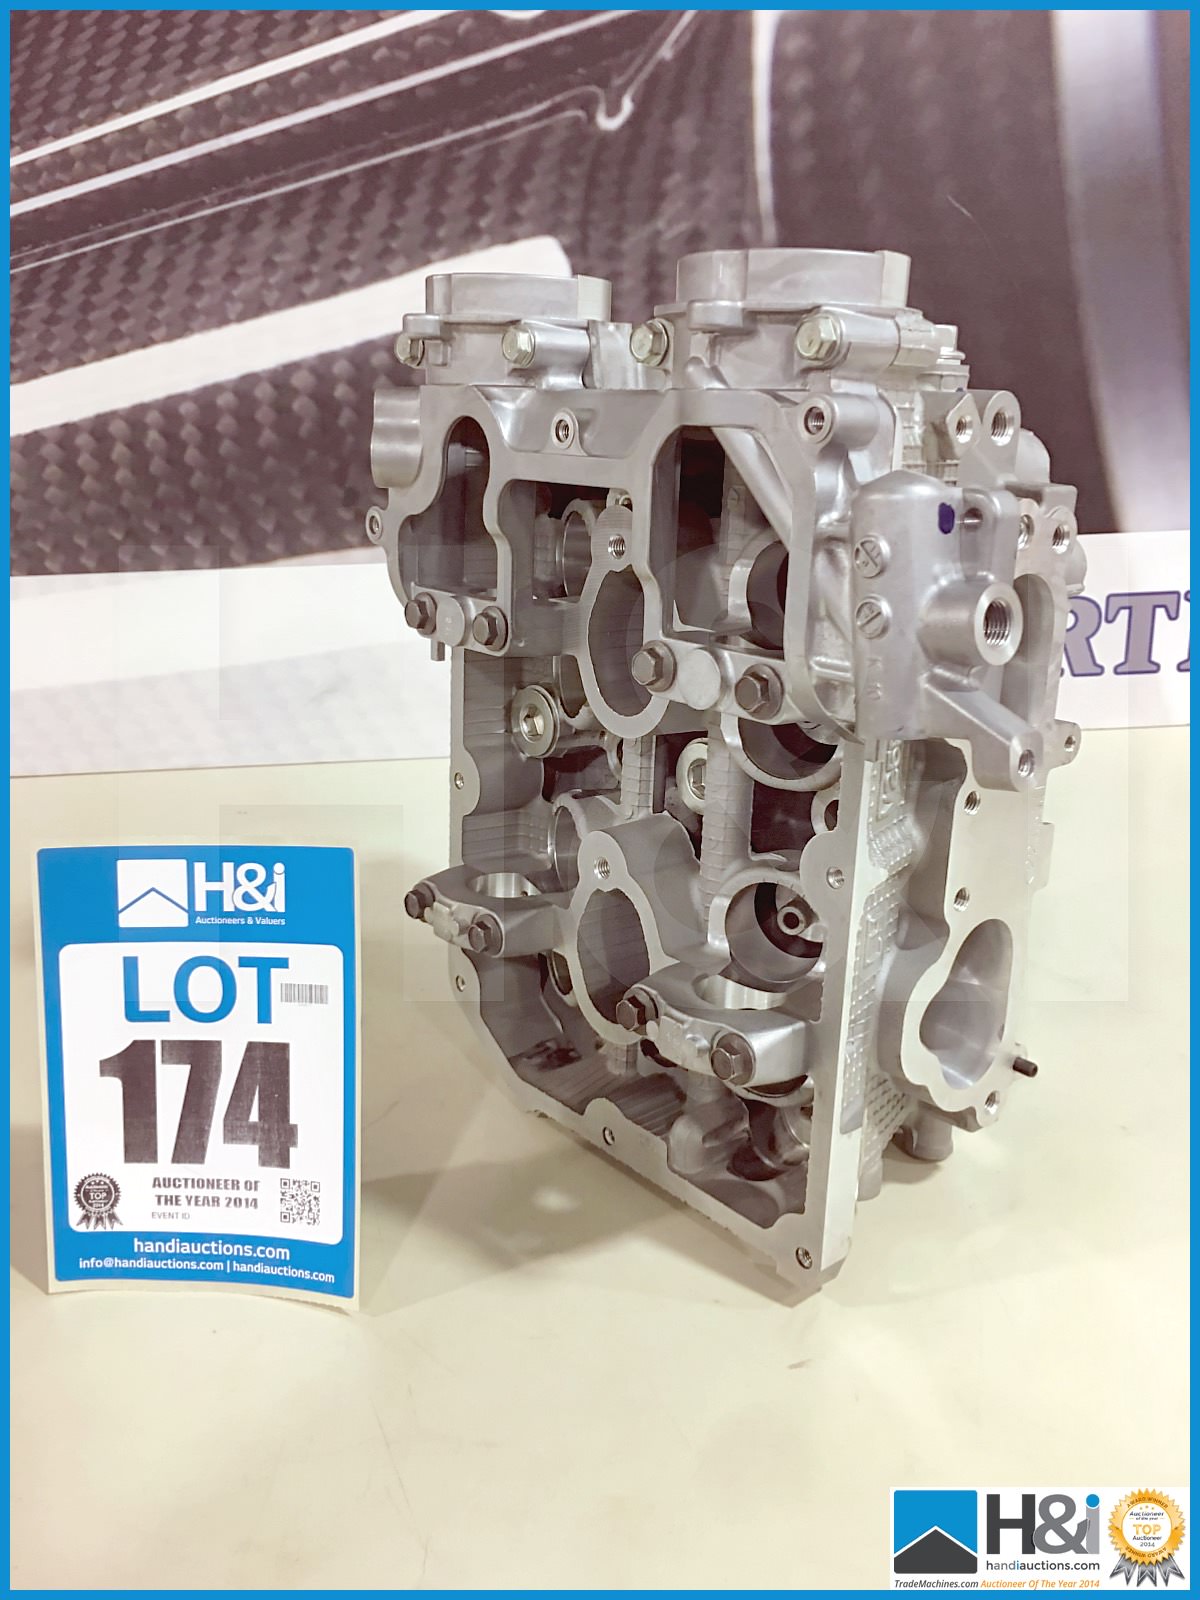 4 off Subaru cylinder head left hand - EJ25 07MY. Appx lot value over GBP 2,100 -- MC:20001530 CILN: - Image 5 of 5